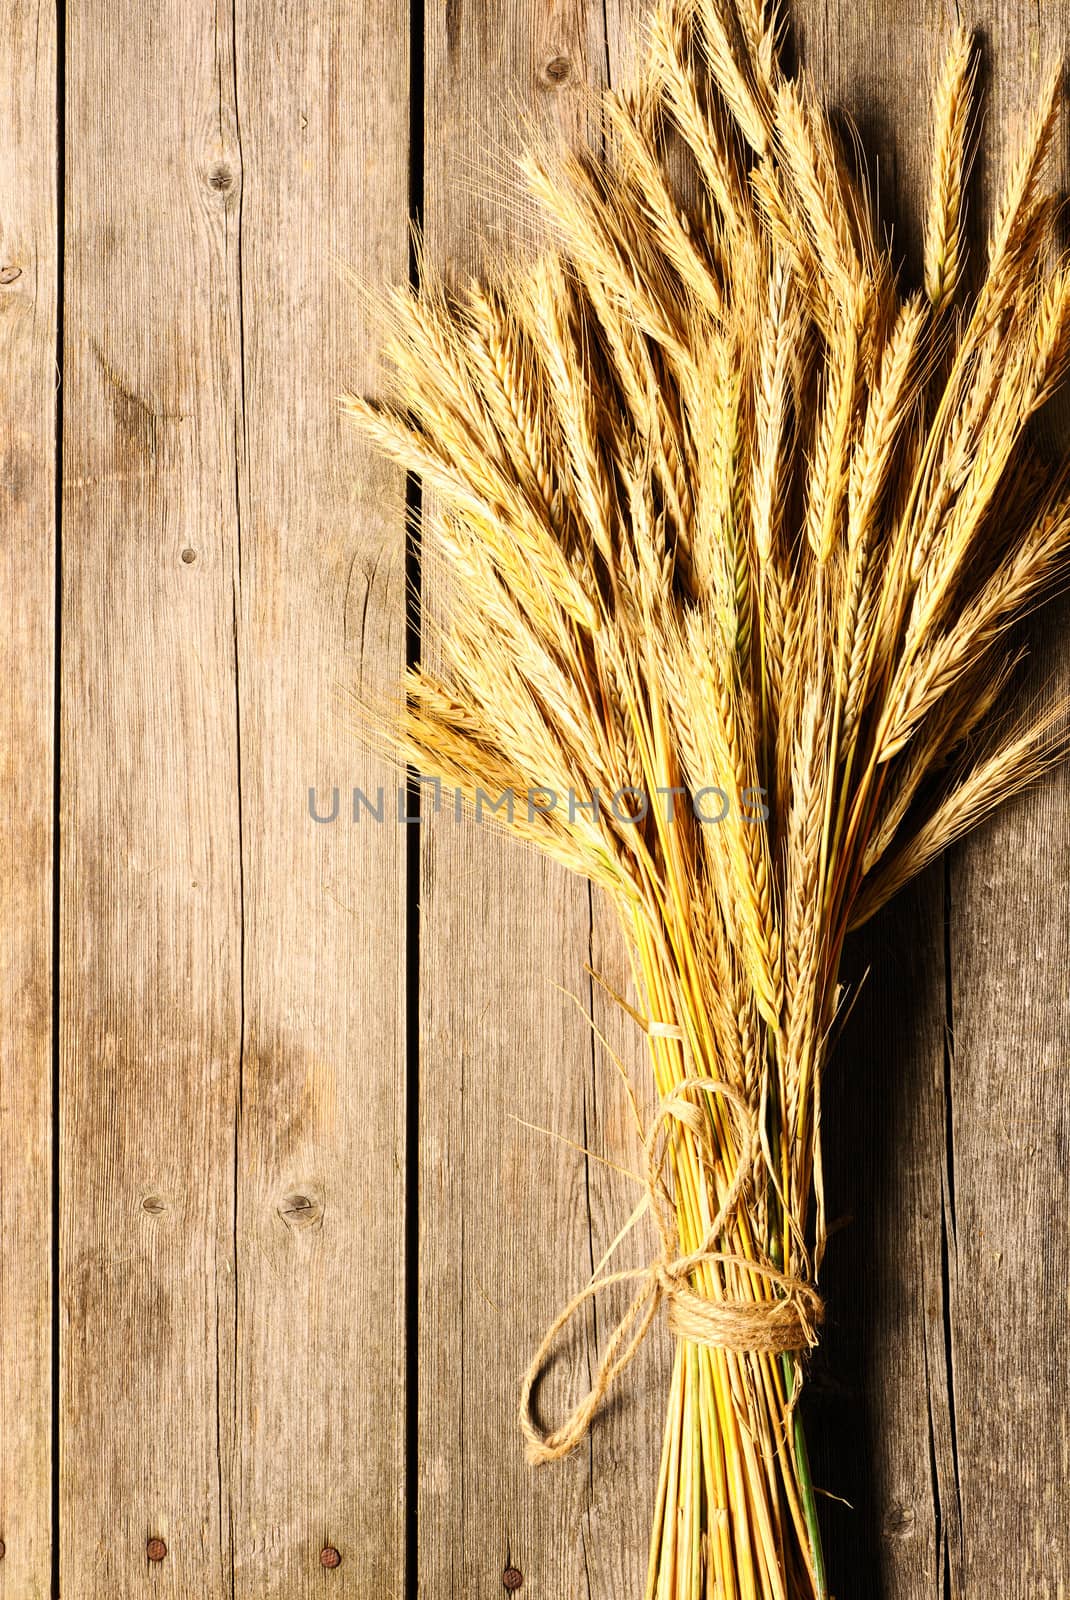 Rye spikelets on wooden background by haveseen